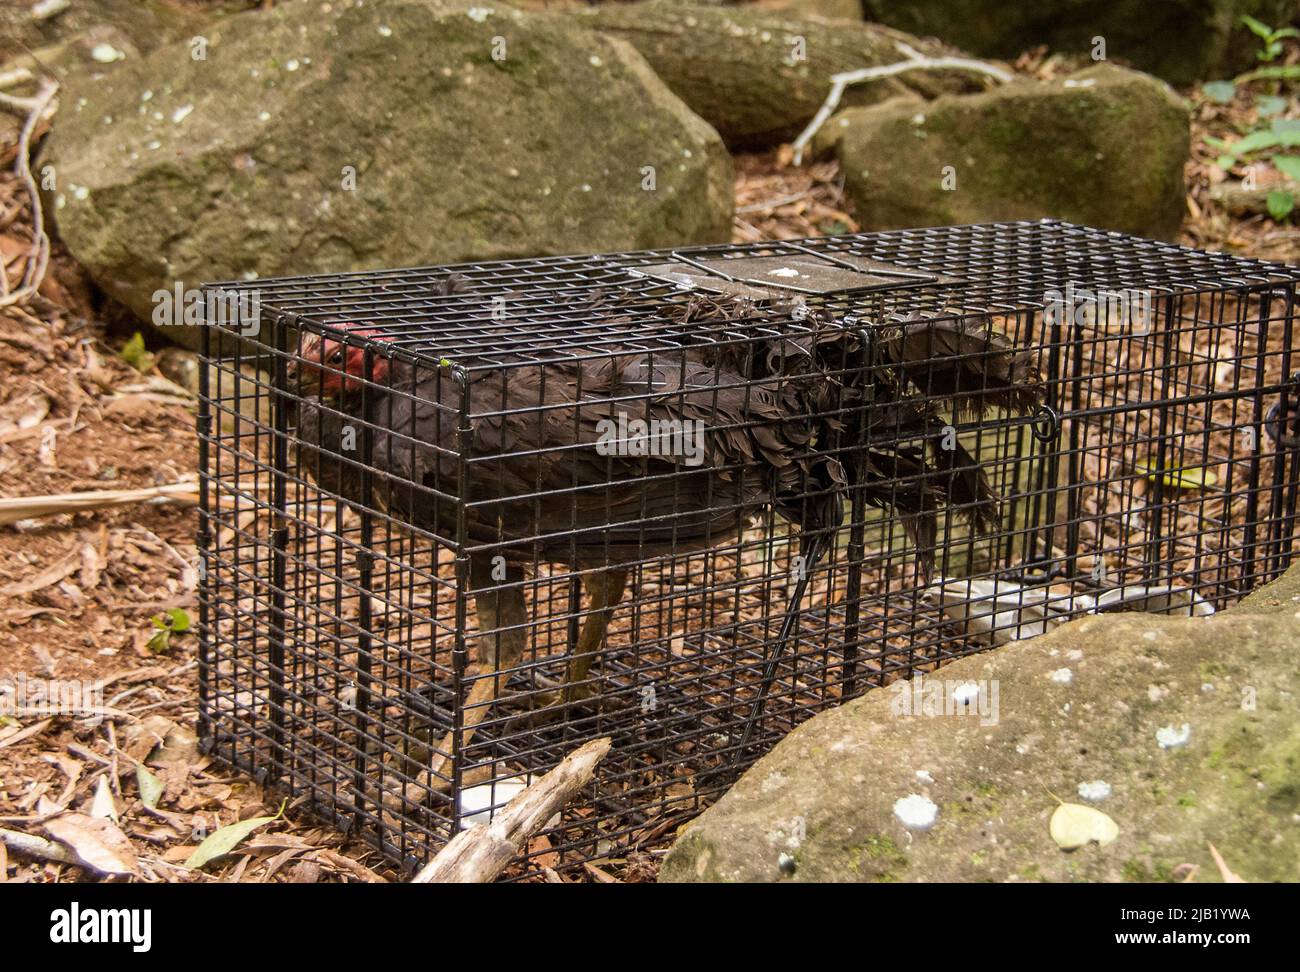 https://c8.alamy.com/comp/2JB1YWA/australian-brush-turkey-alectura-lathami-inadvertently-caught-in-a-humane-feral-cat-trap-in-rainforest-queensland-released-unharmed-2JB1YWA.jpg